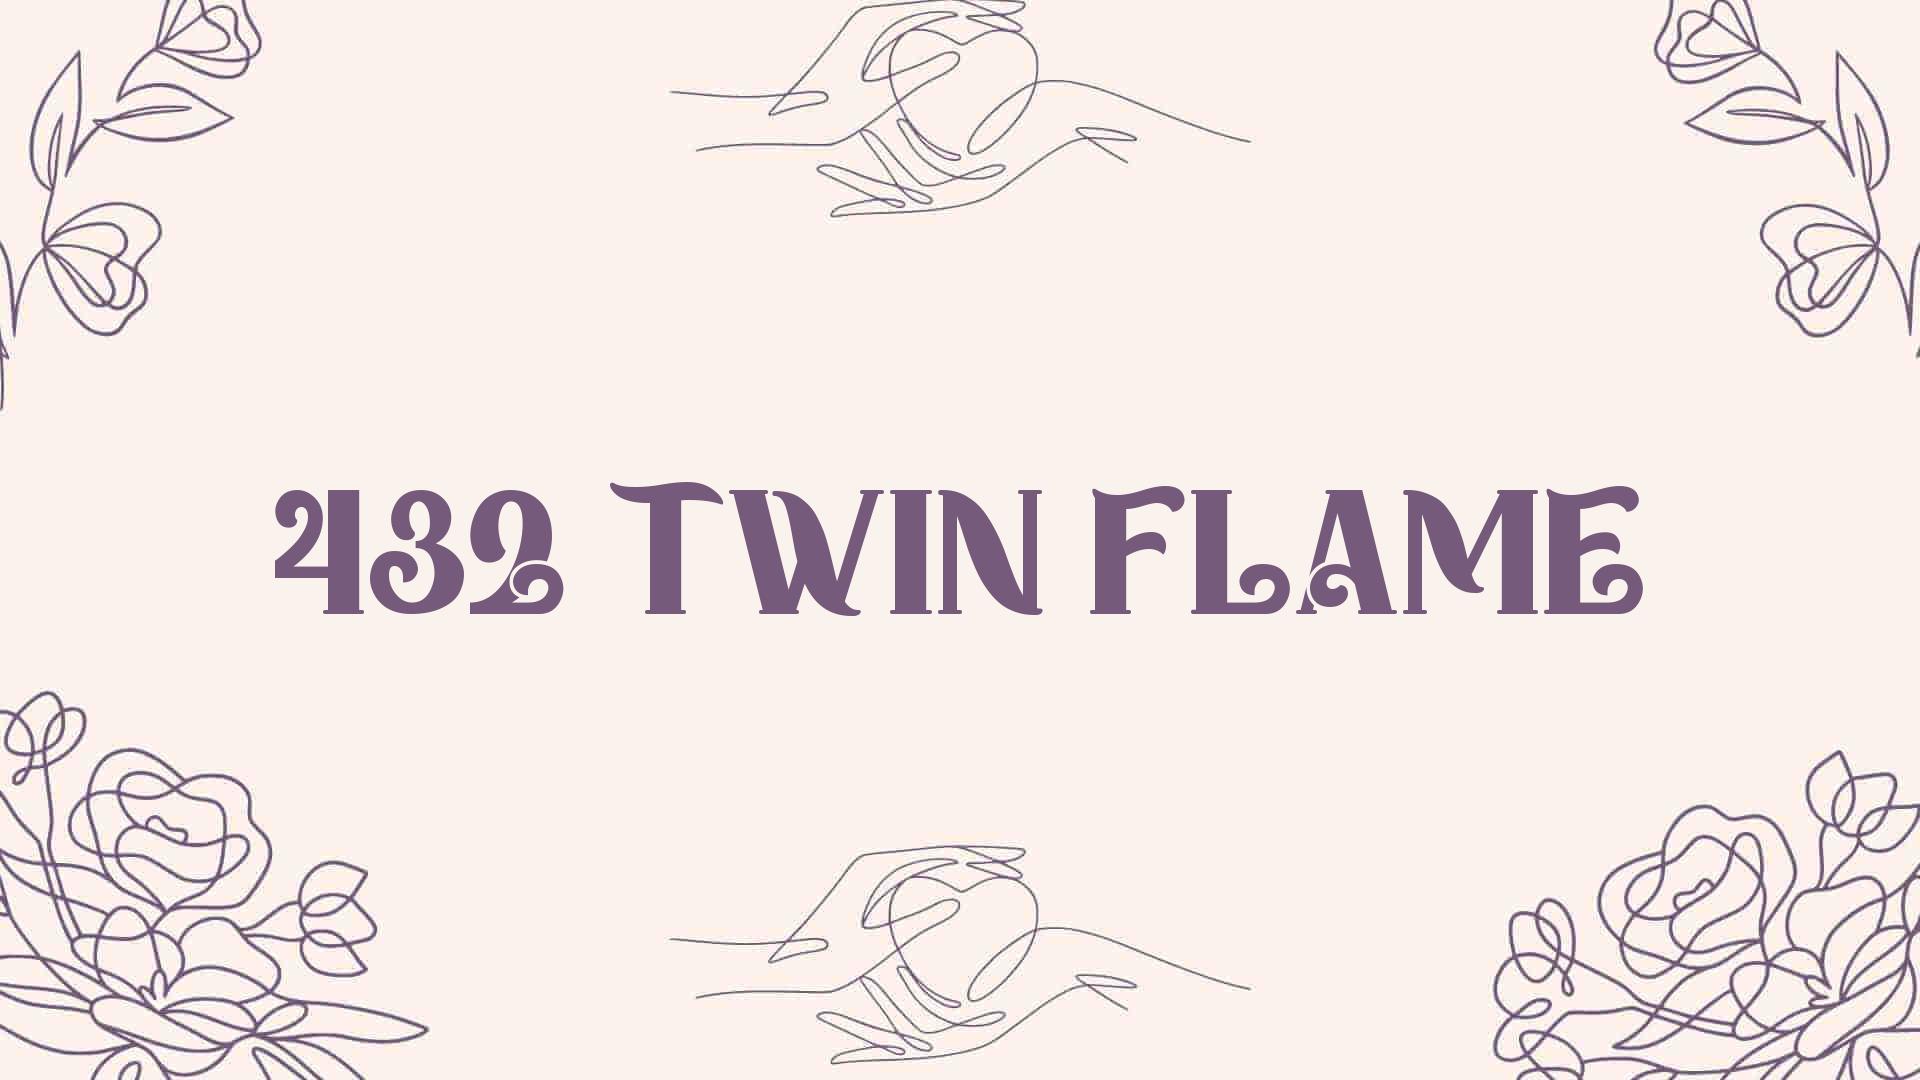 432 twin flame [ Meaning Revealed ]